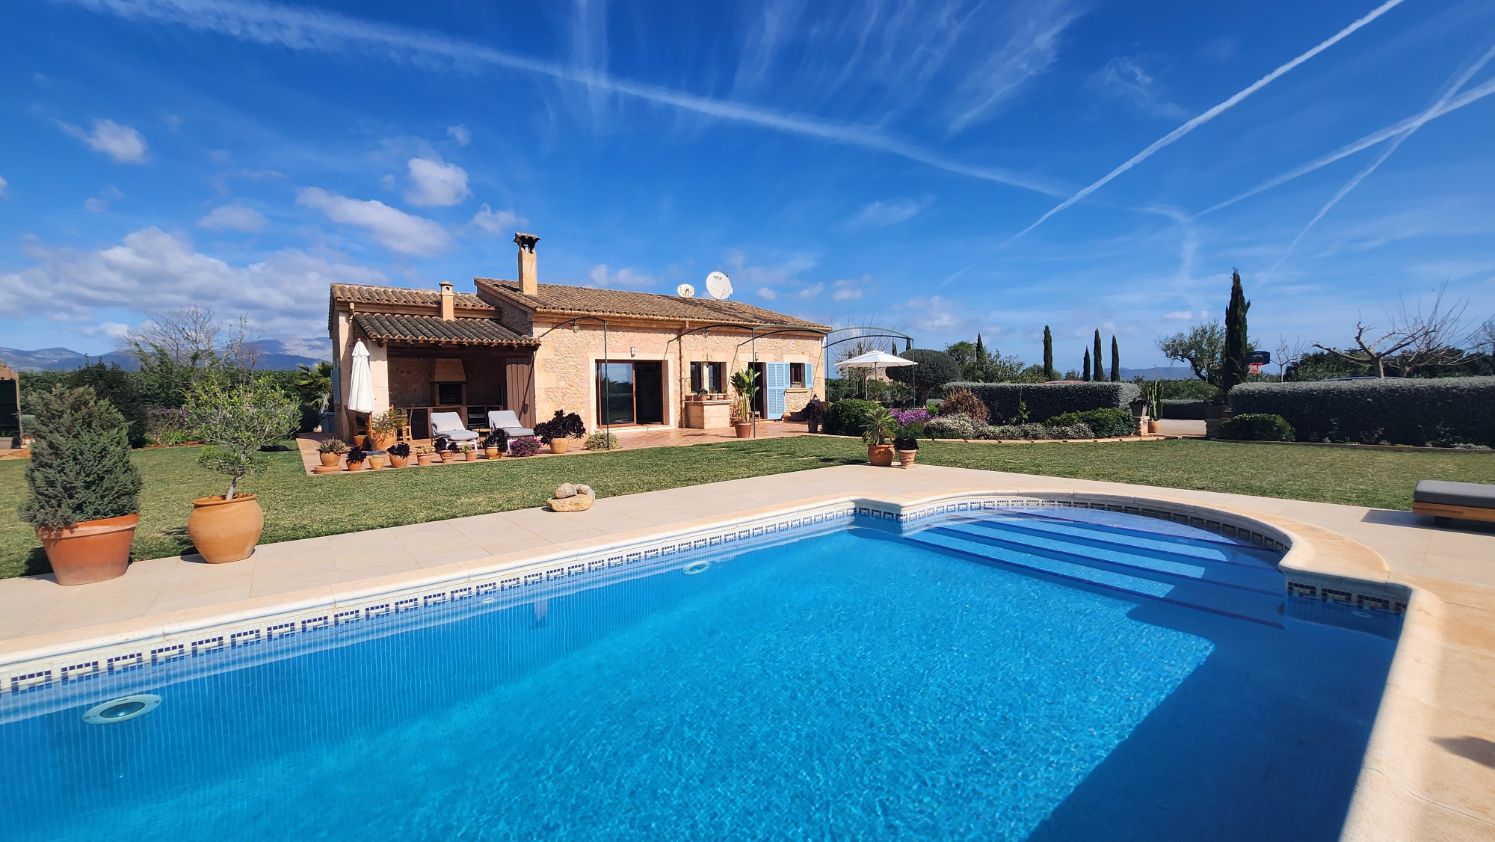 Escape the City and Enjoy Summer in a Mallorcan Countryside Villa with private pool